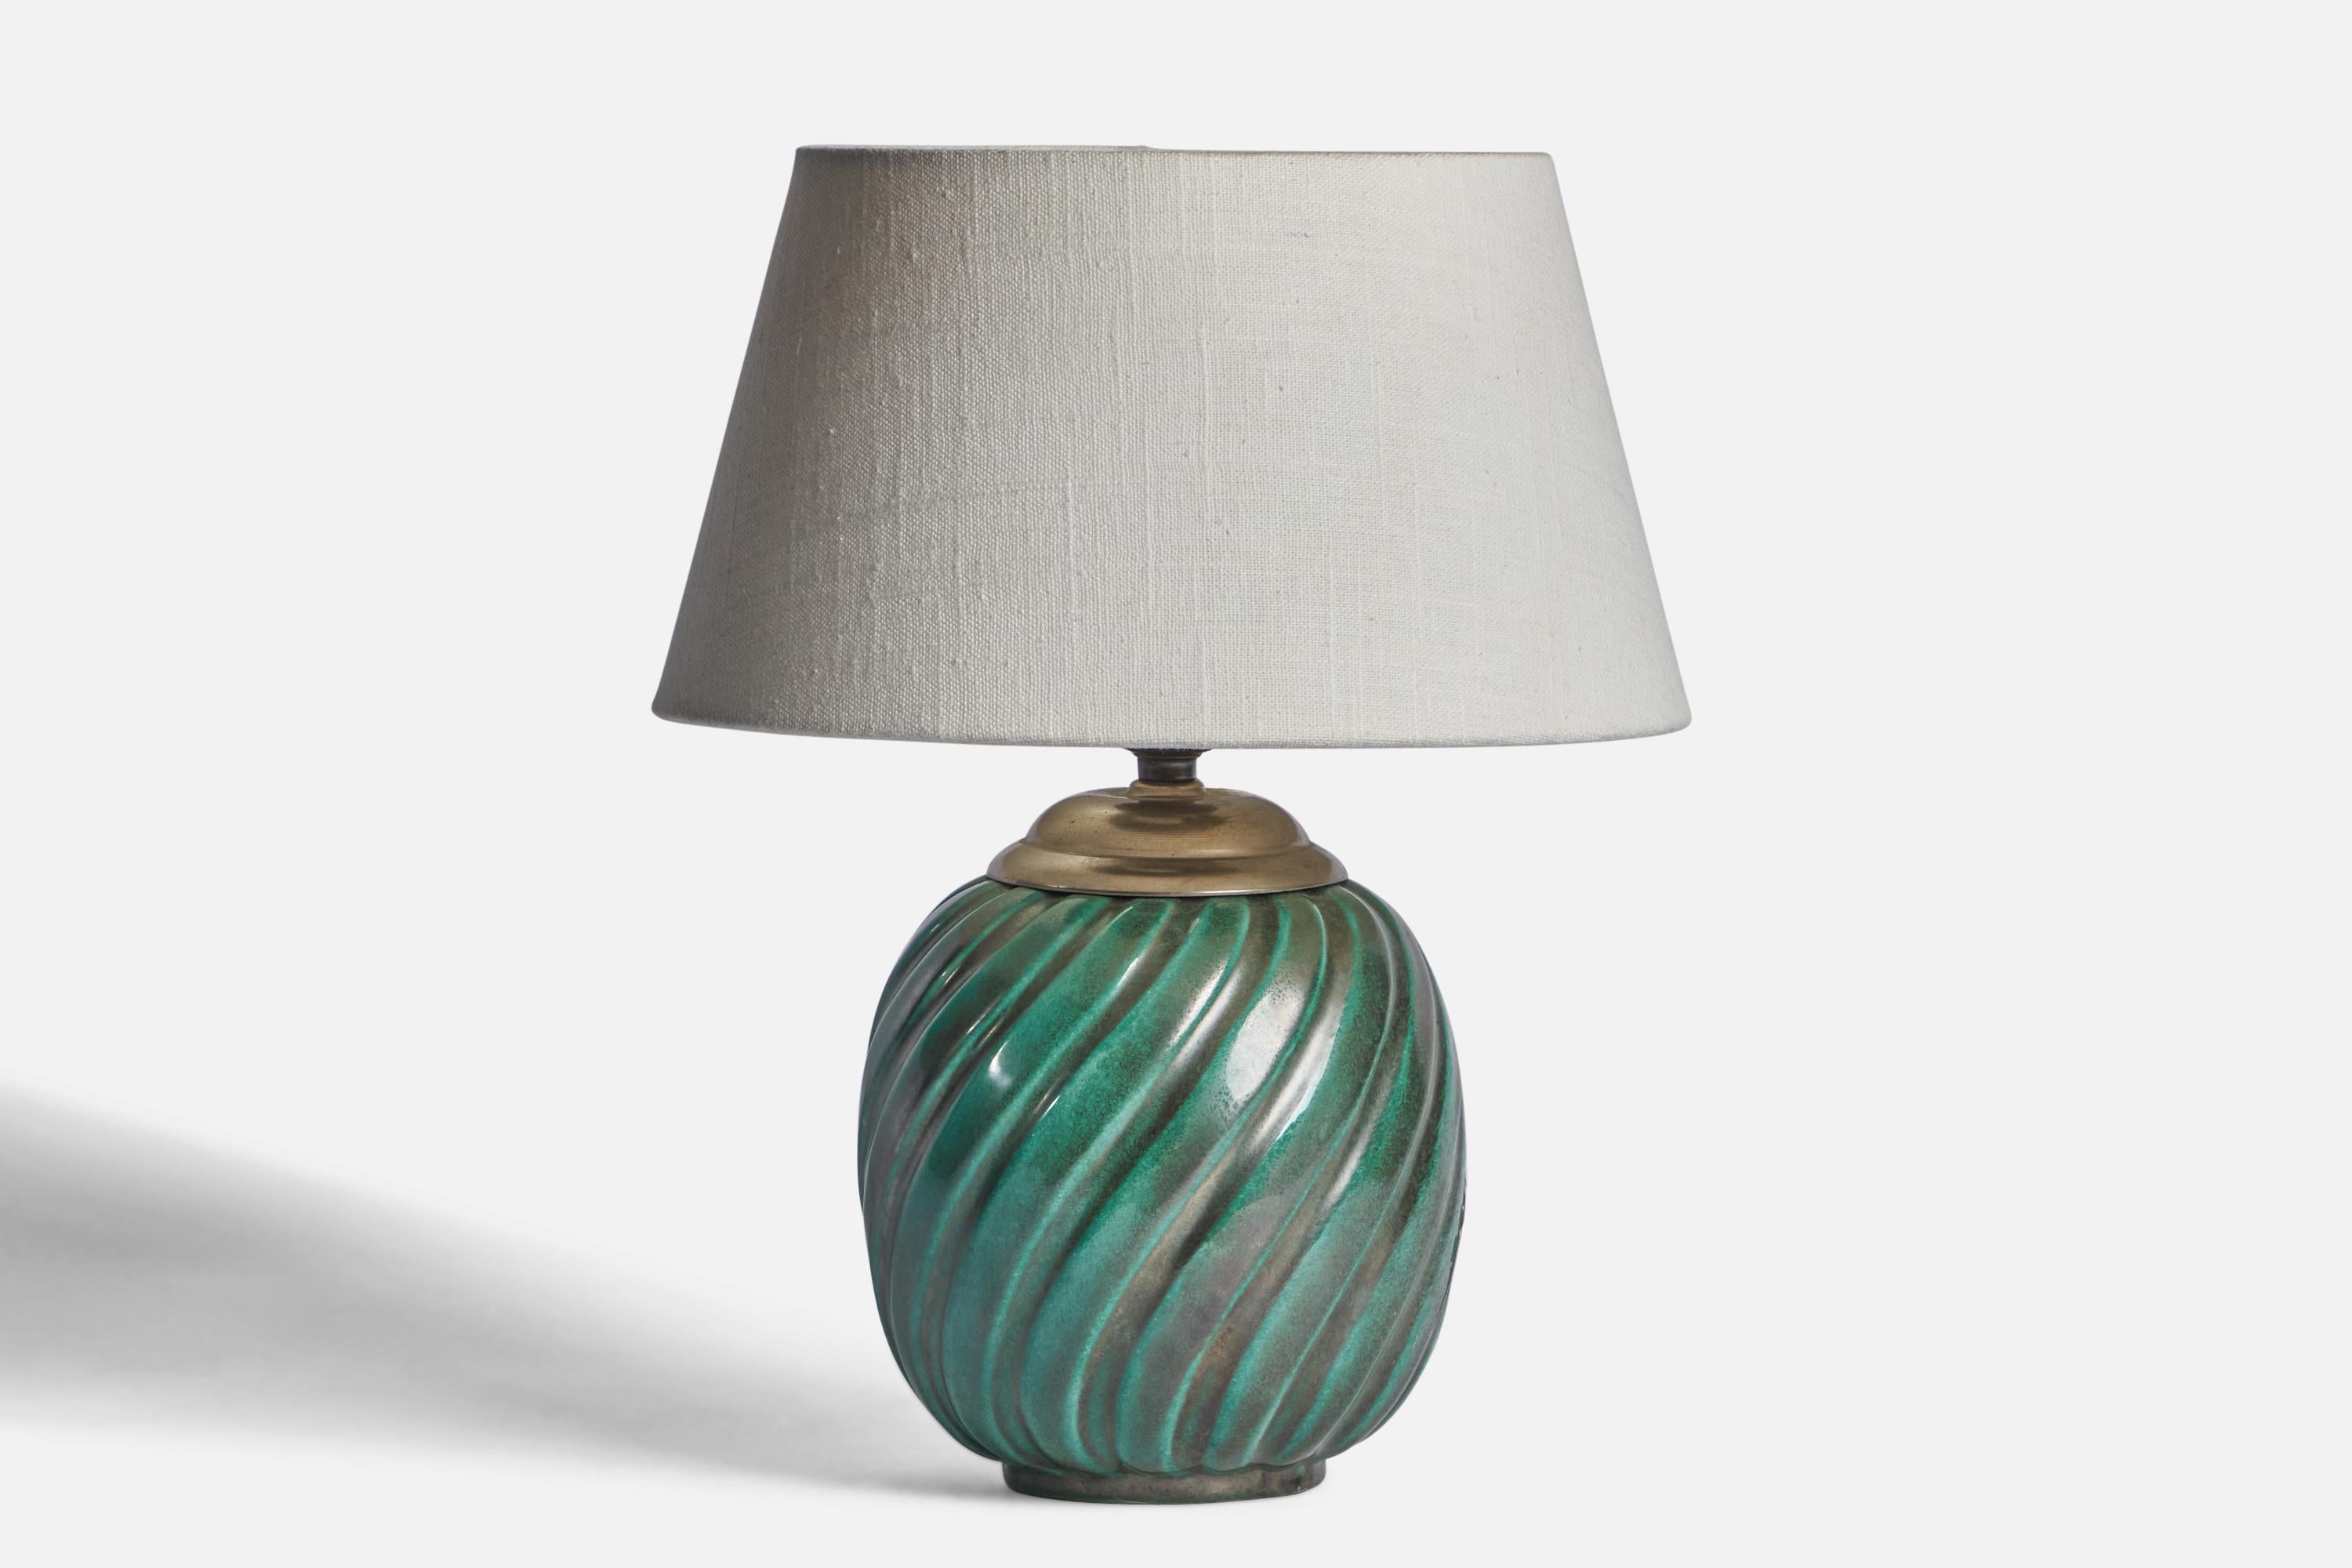 A green-glazed fluted earthenware and brass table lamp designed and produced by Upsala Ekeby, Sweden, 1930s.

Dimensions of Lamp (inches): 10” H x 5.75” Diameter
Dimensions of Shade (inches): 7” Top Diameter x 10” Bottom Diameter x